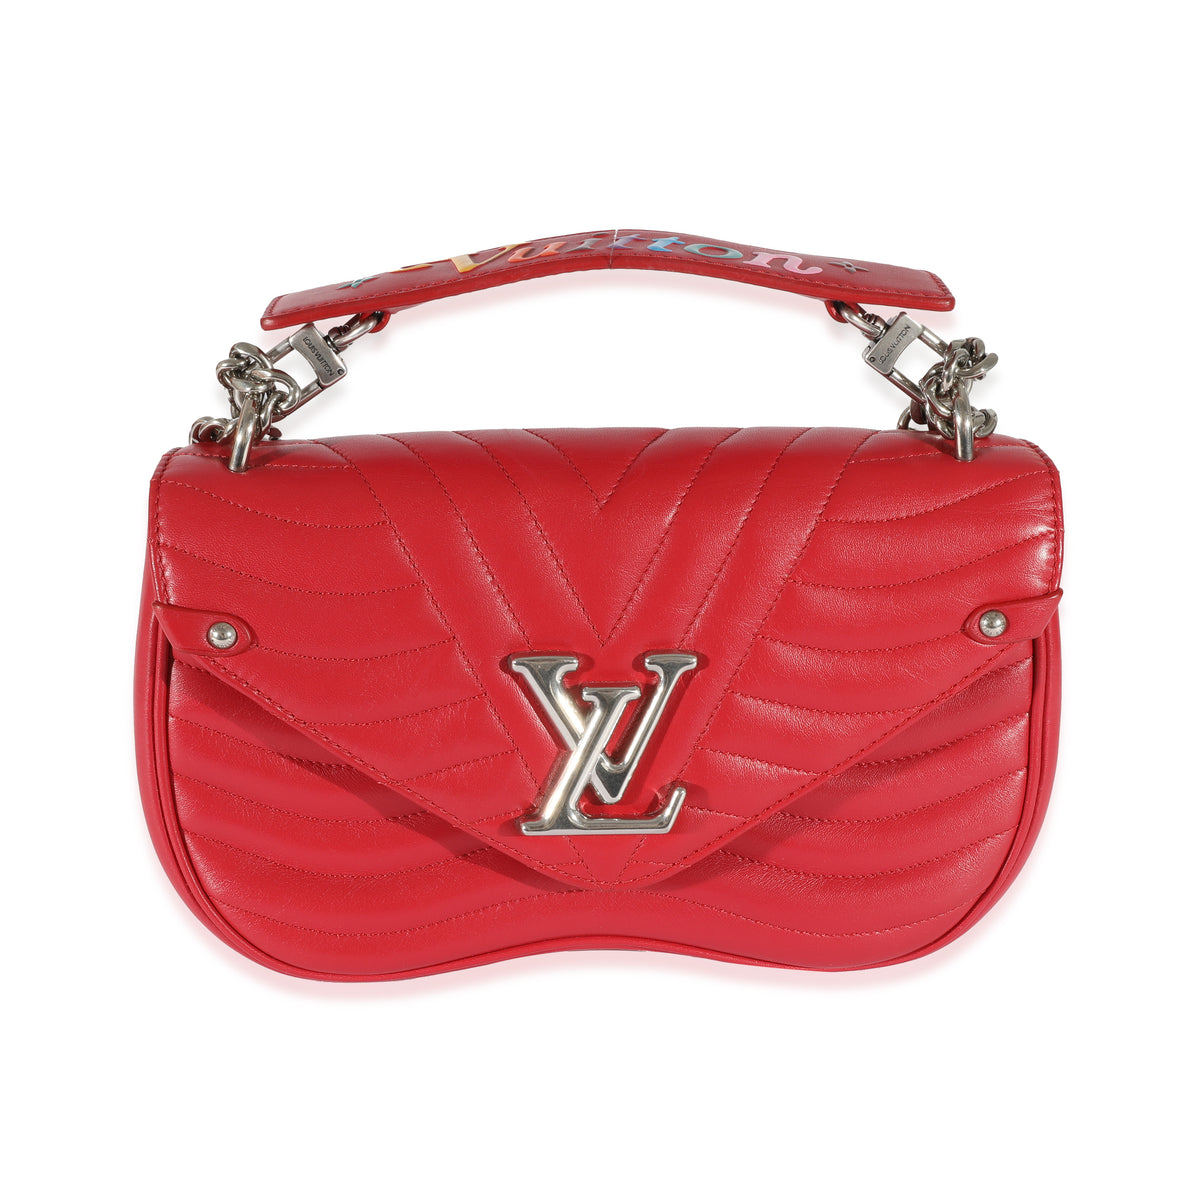 Louis Vuitton 2018 Pre-owned New Wave Chain Shoulder Bag - Red